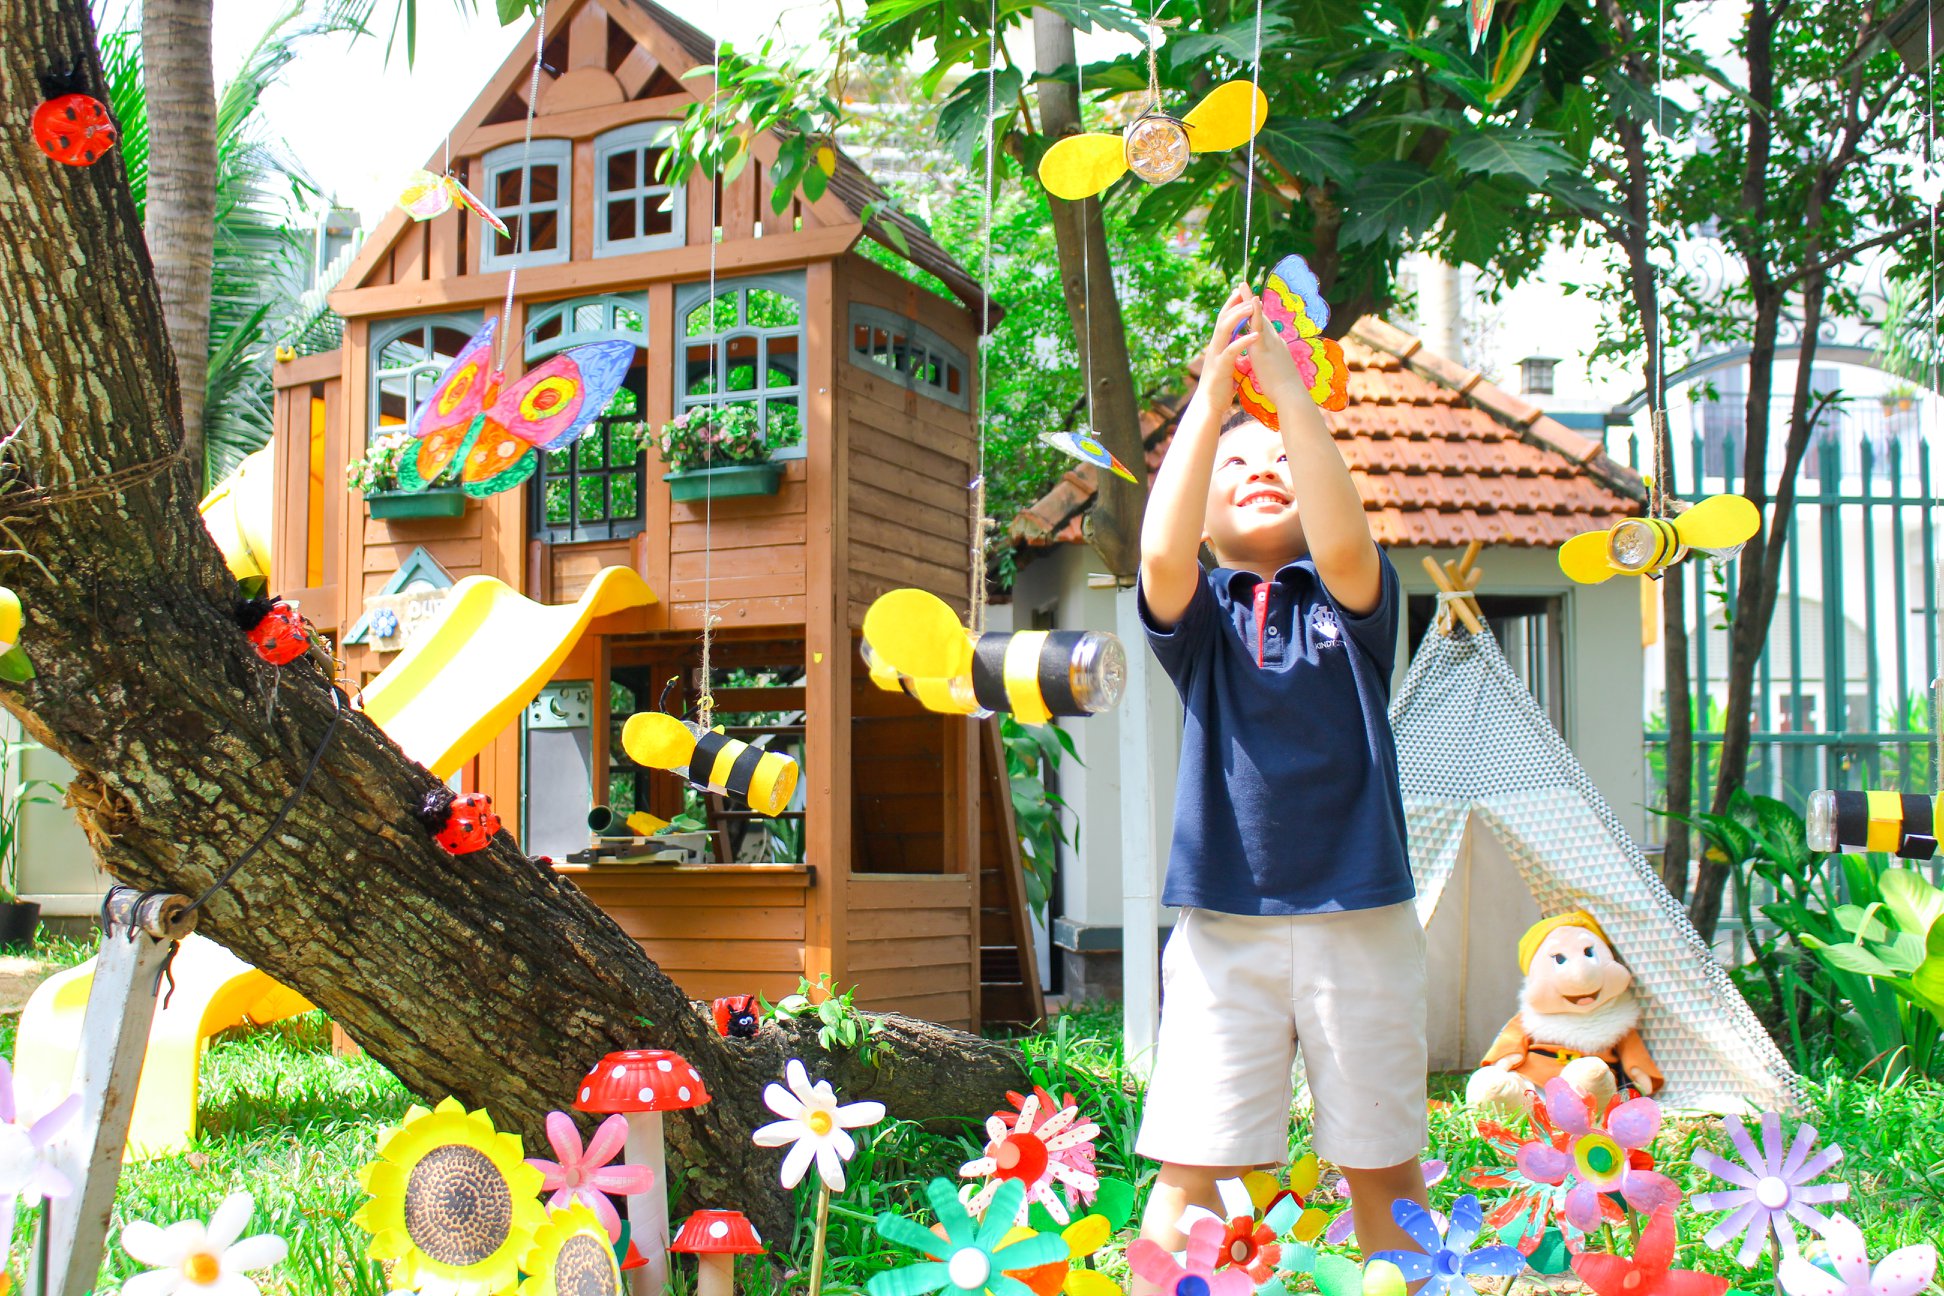 OUR RECYCLED GARDEN Kindy City International Preschool - Ngo Quang Huy Street, Thao Dien Ward